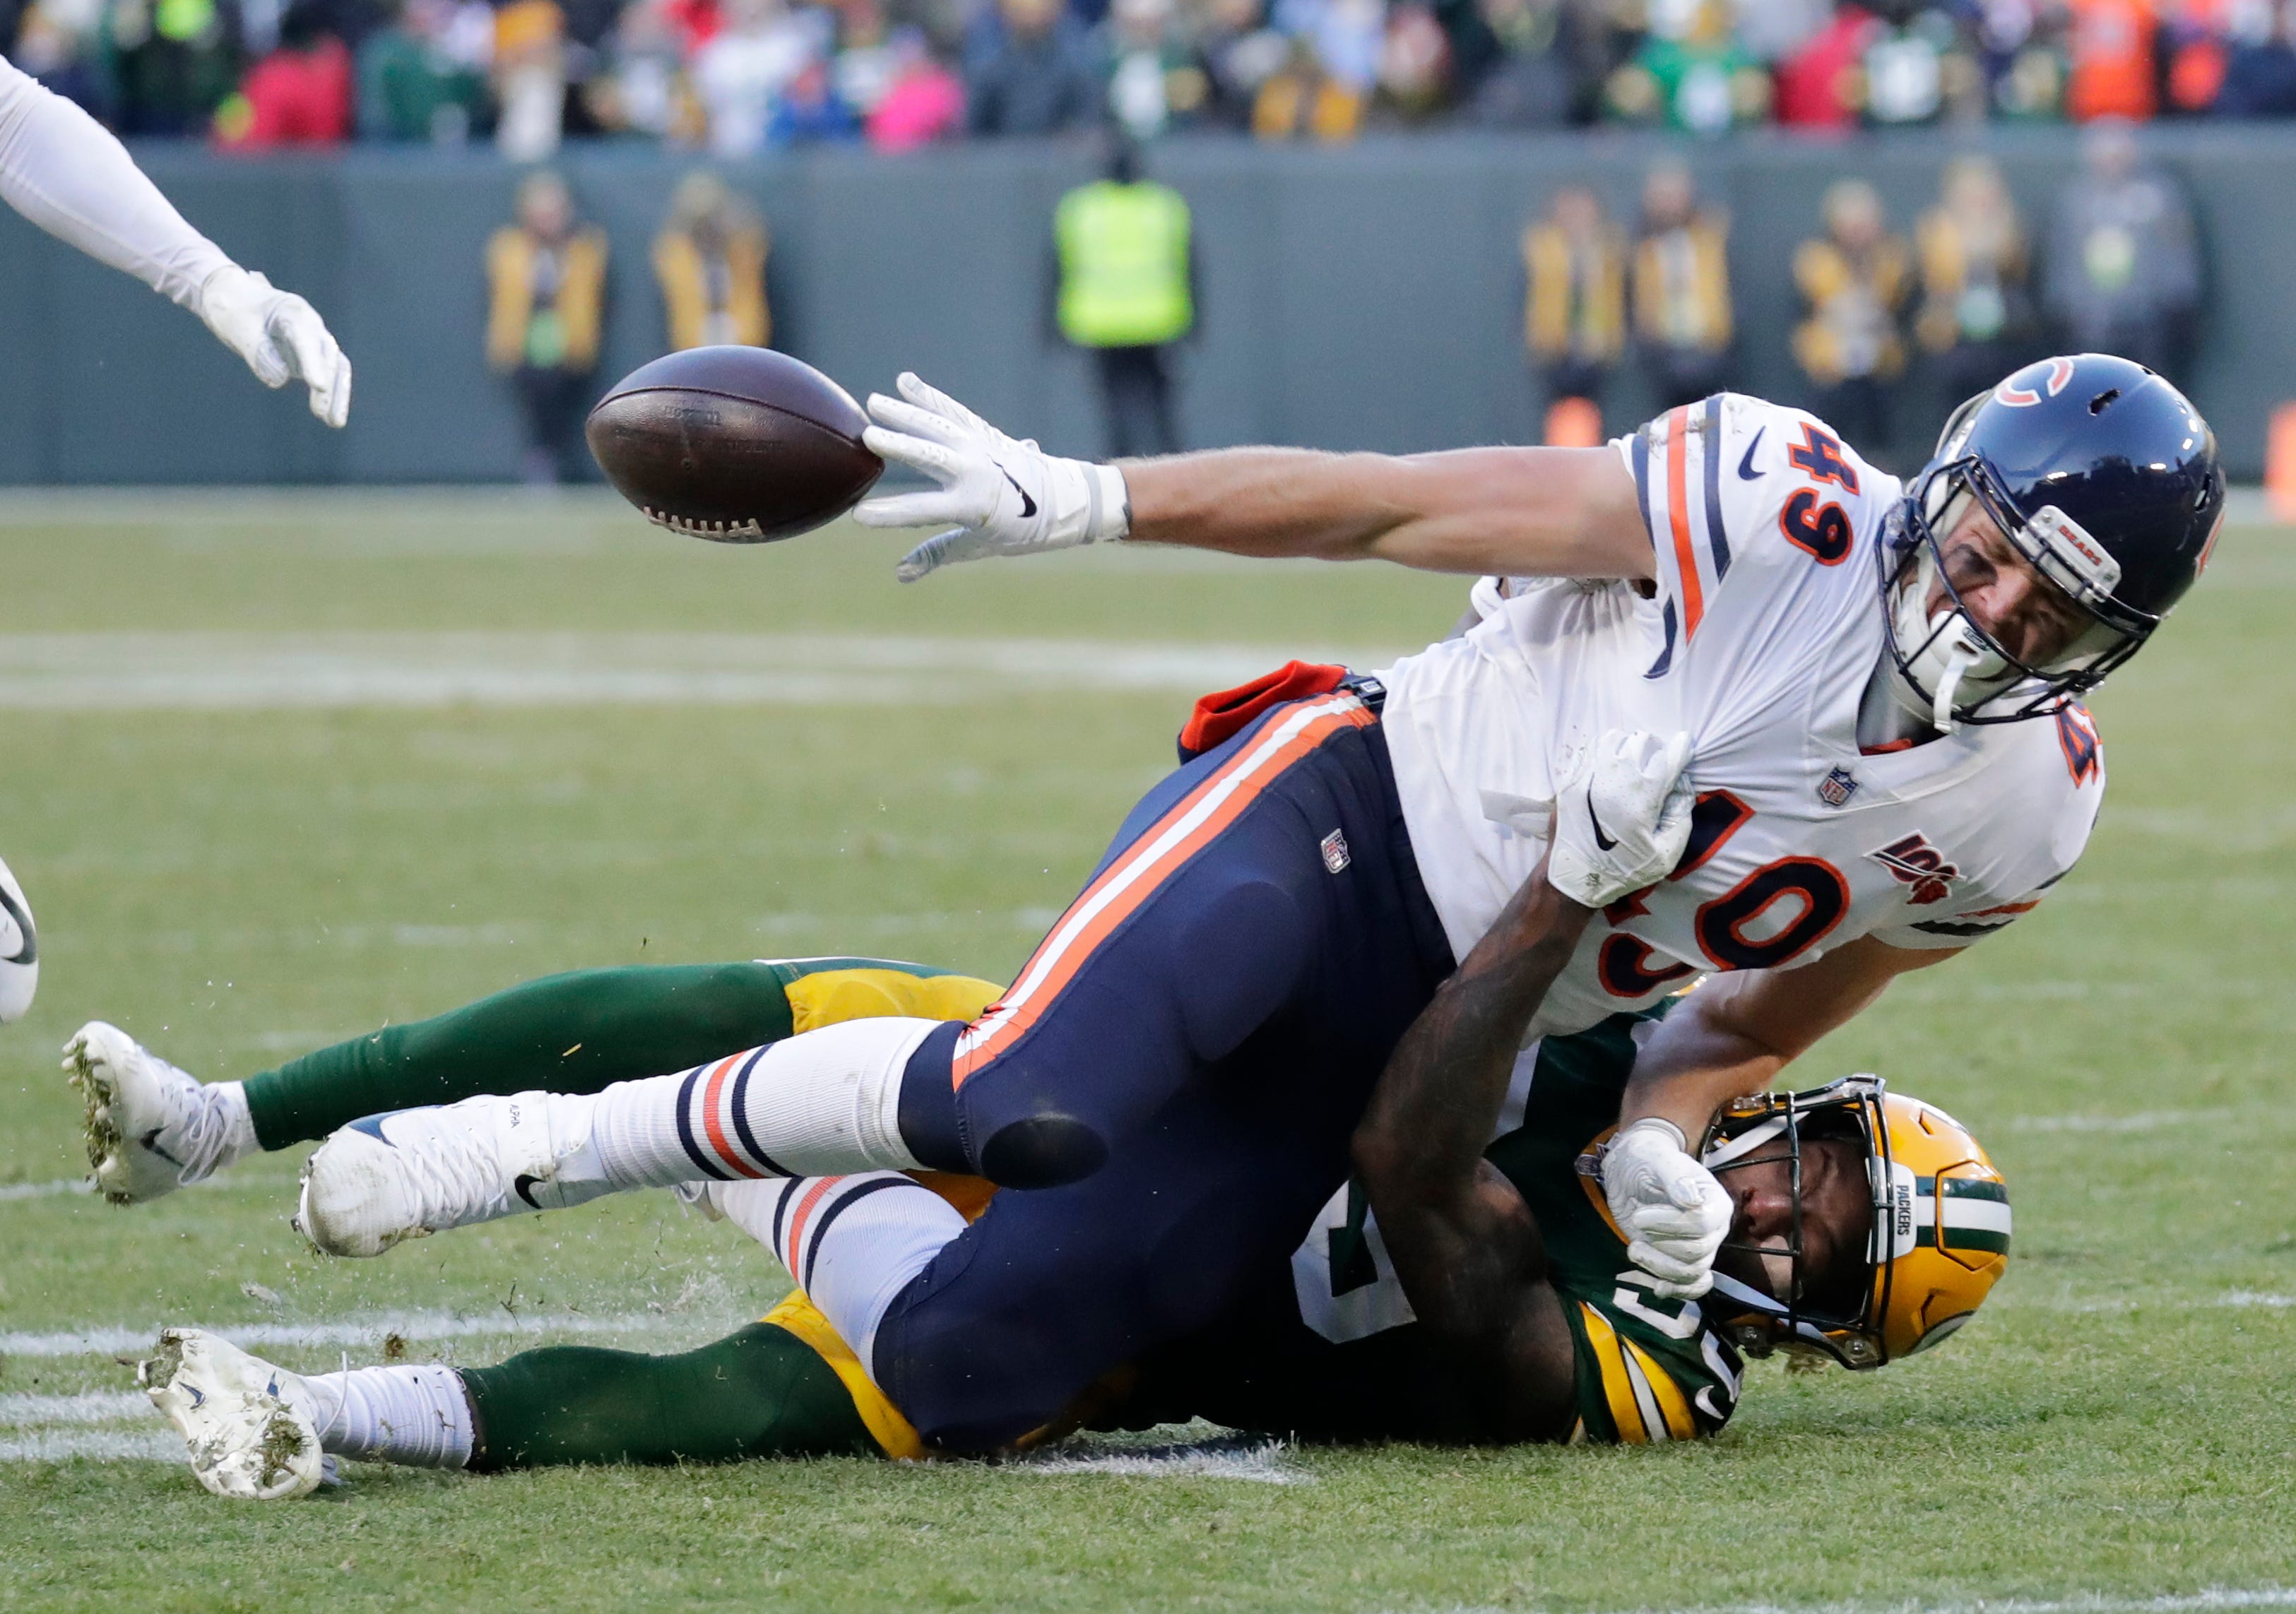 Chicago Bears tight end Jesper Horsted (49) laterals the ball on the last play of the game against Green Bay Packers defensive back Chandon Sullivan (39) Sunday, December 15, 2019, at Lambeau Field in Green Bay, Wis. Tramon Williams (38) recovered the ball to end the game.